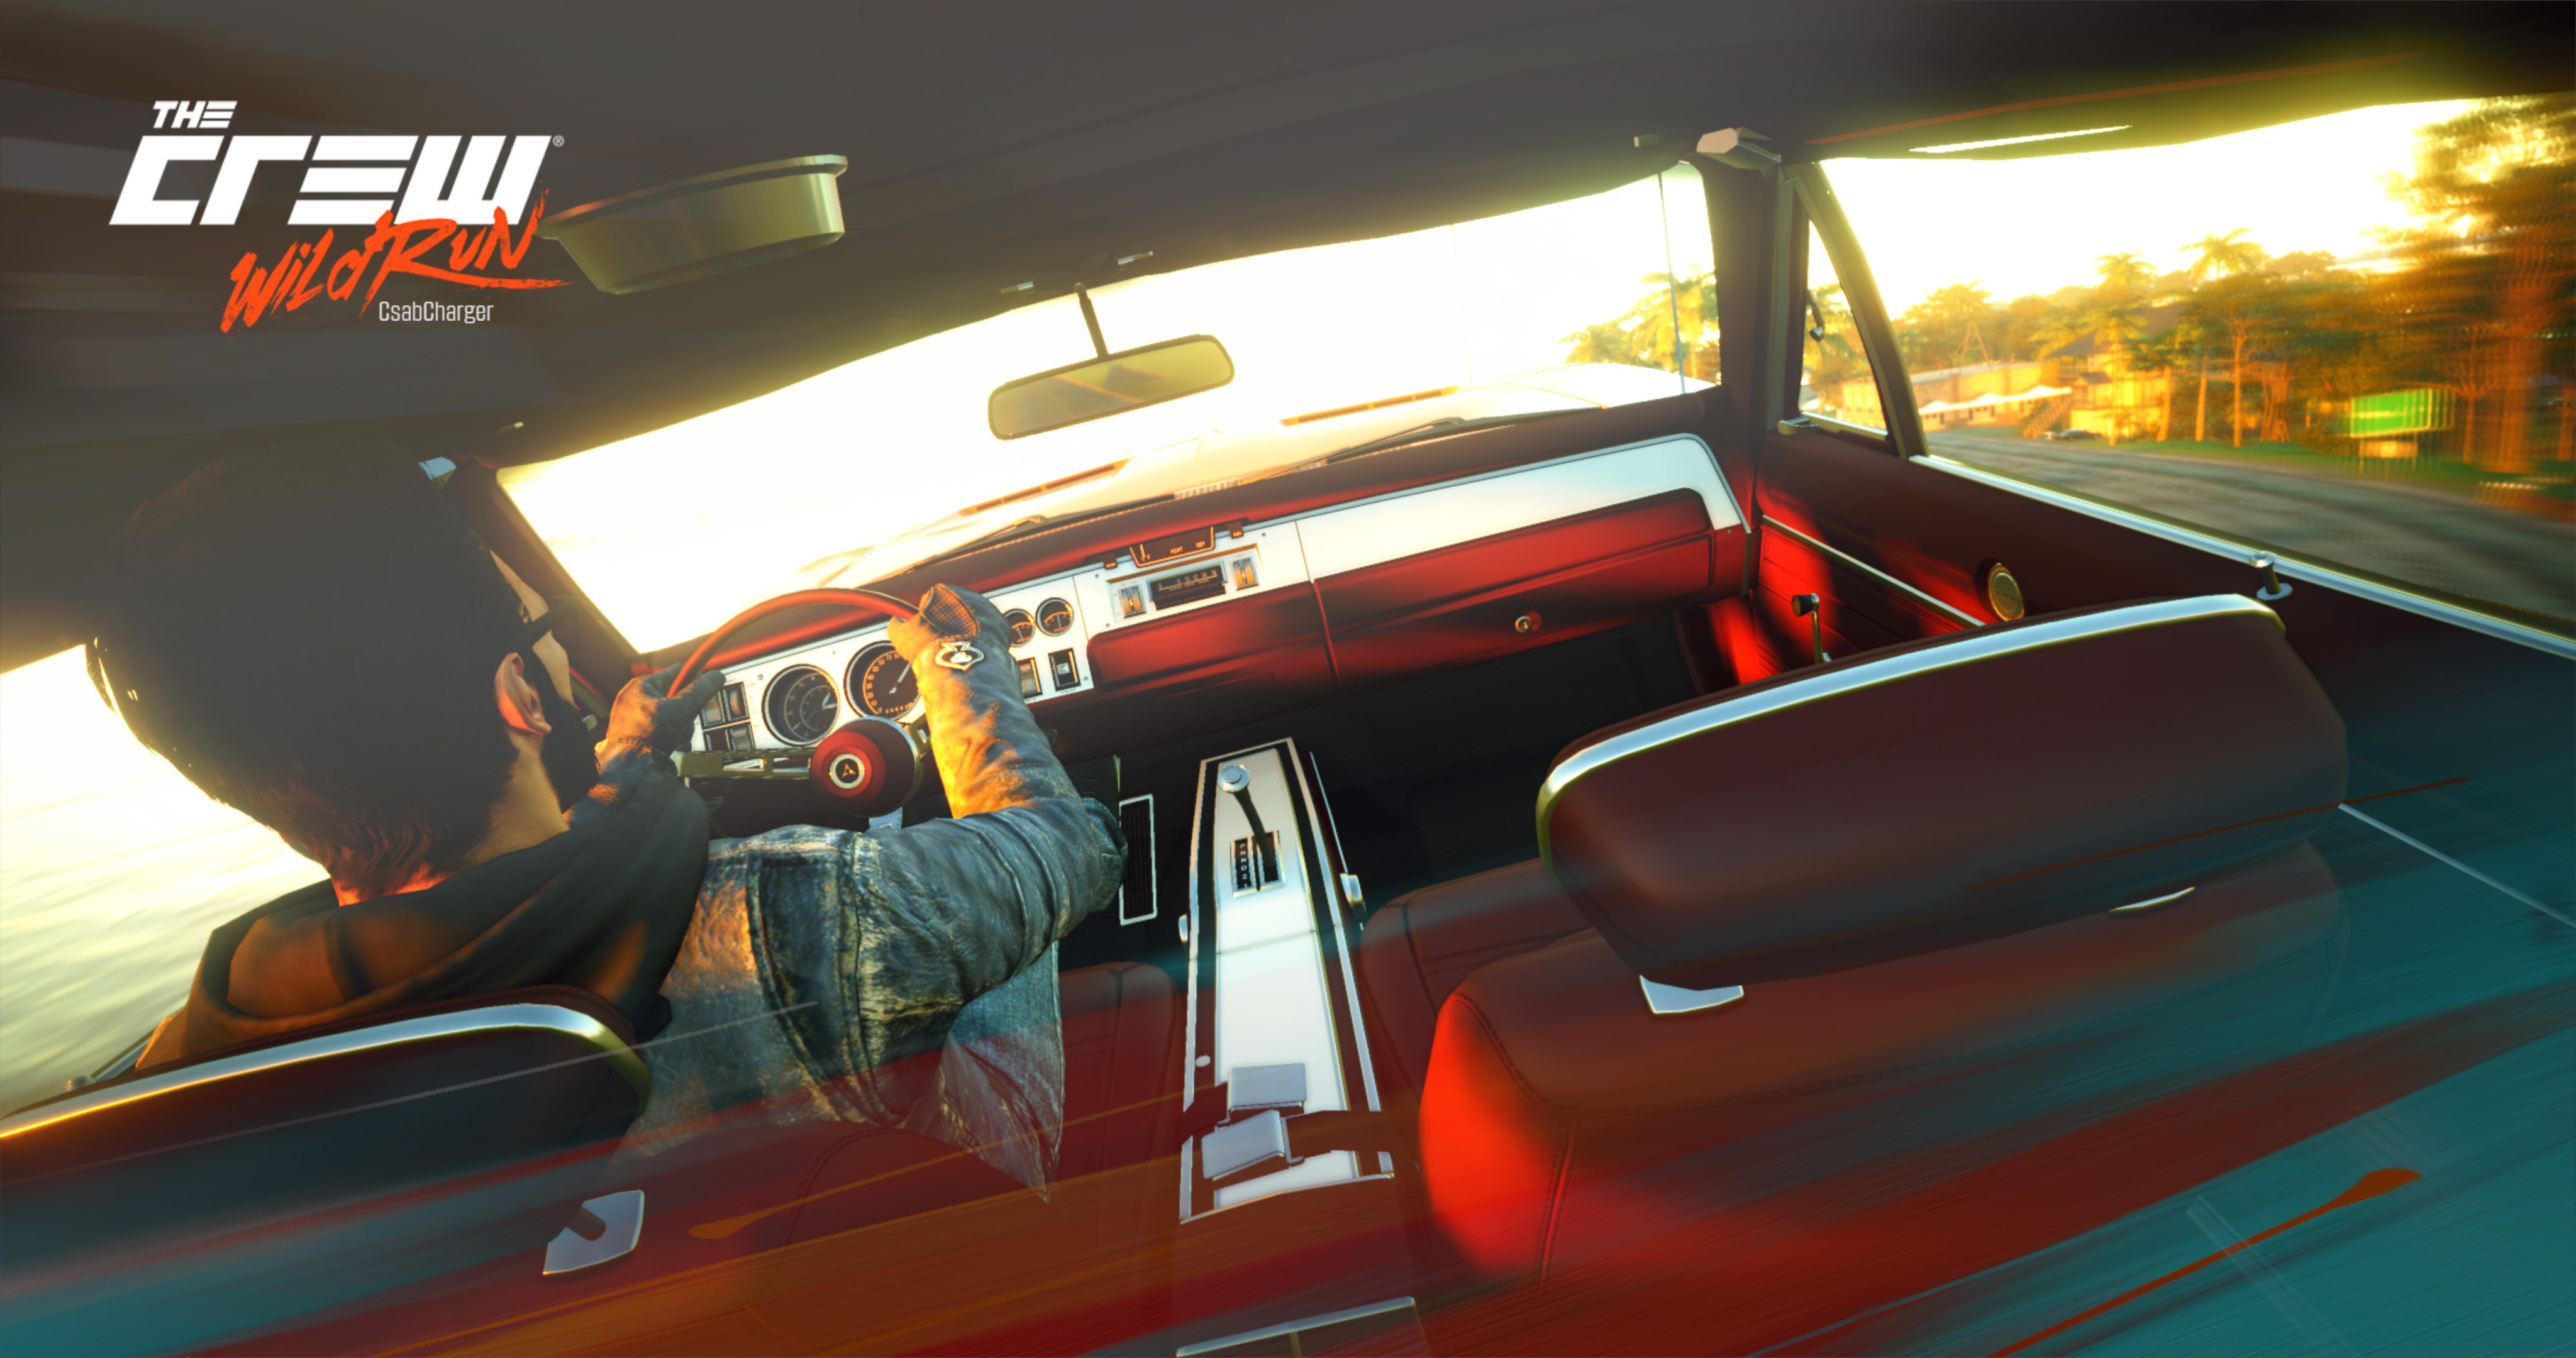 The Crew, The Crew Wild Run, Dodge Charger R T 1968, Vehicle interiors, Race cars, Car interior Wallpaper